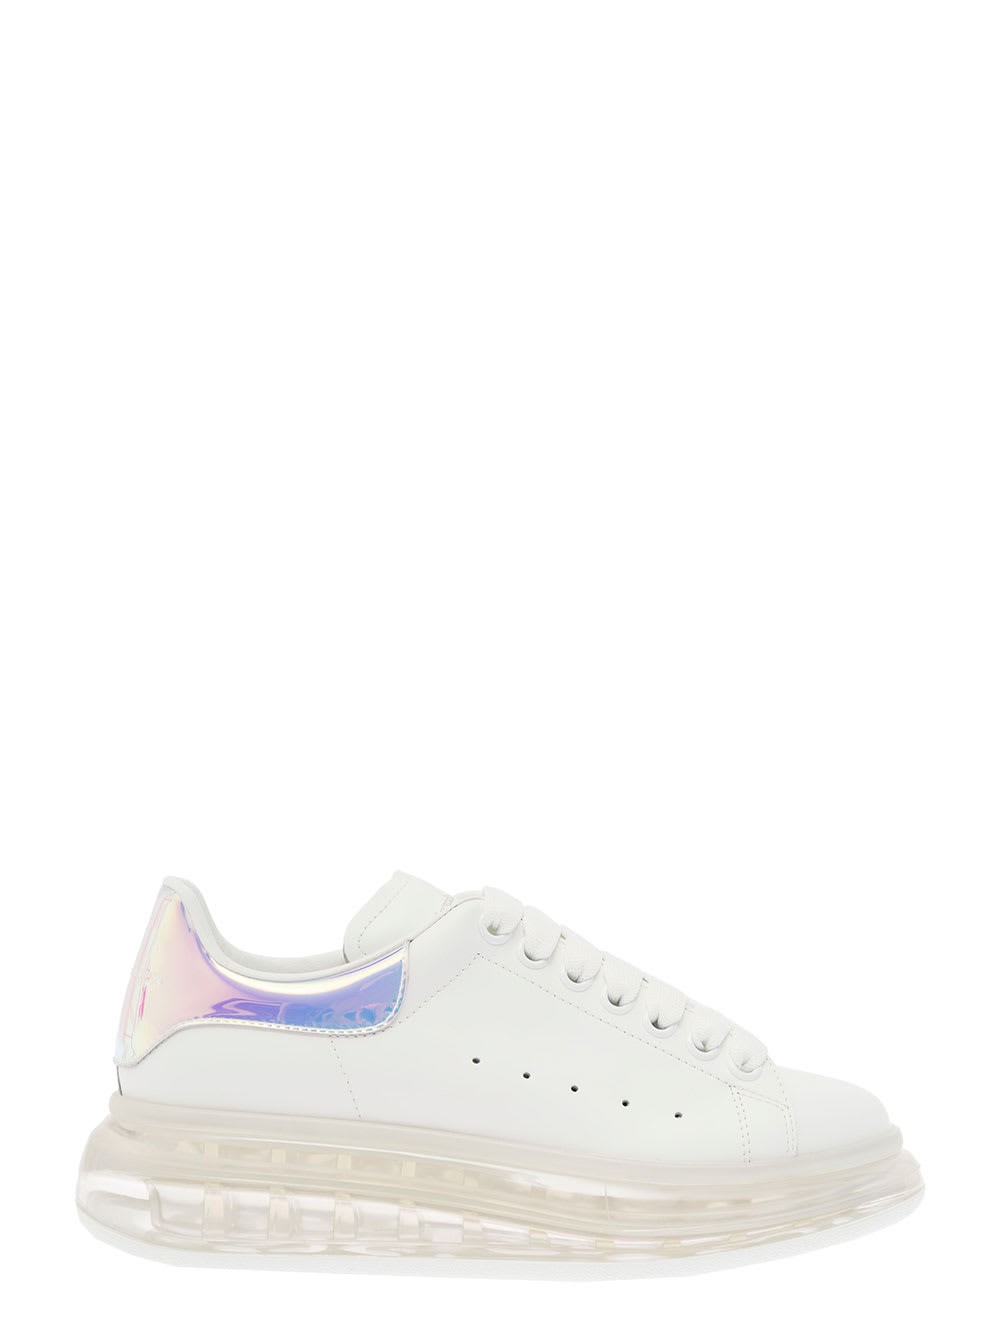 Alexander Mcqueen Womans Oversize White Leather Sneakers With Multicolor Heel Tab